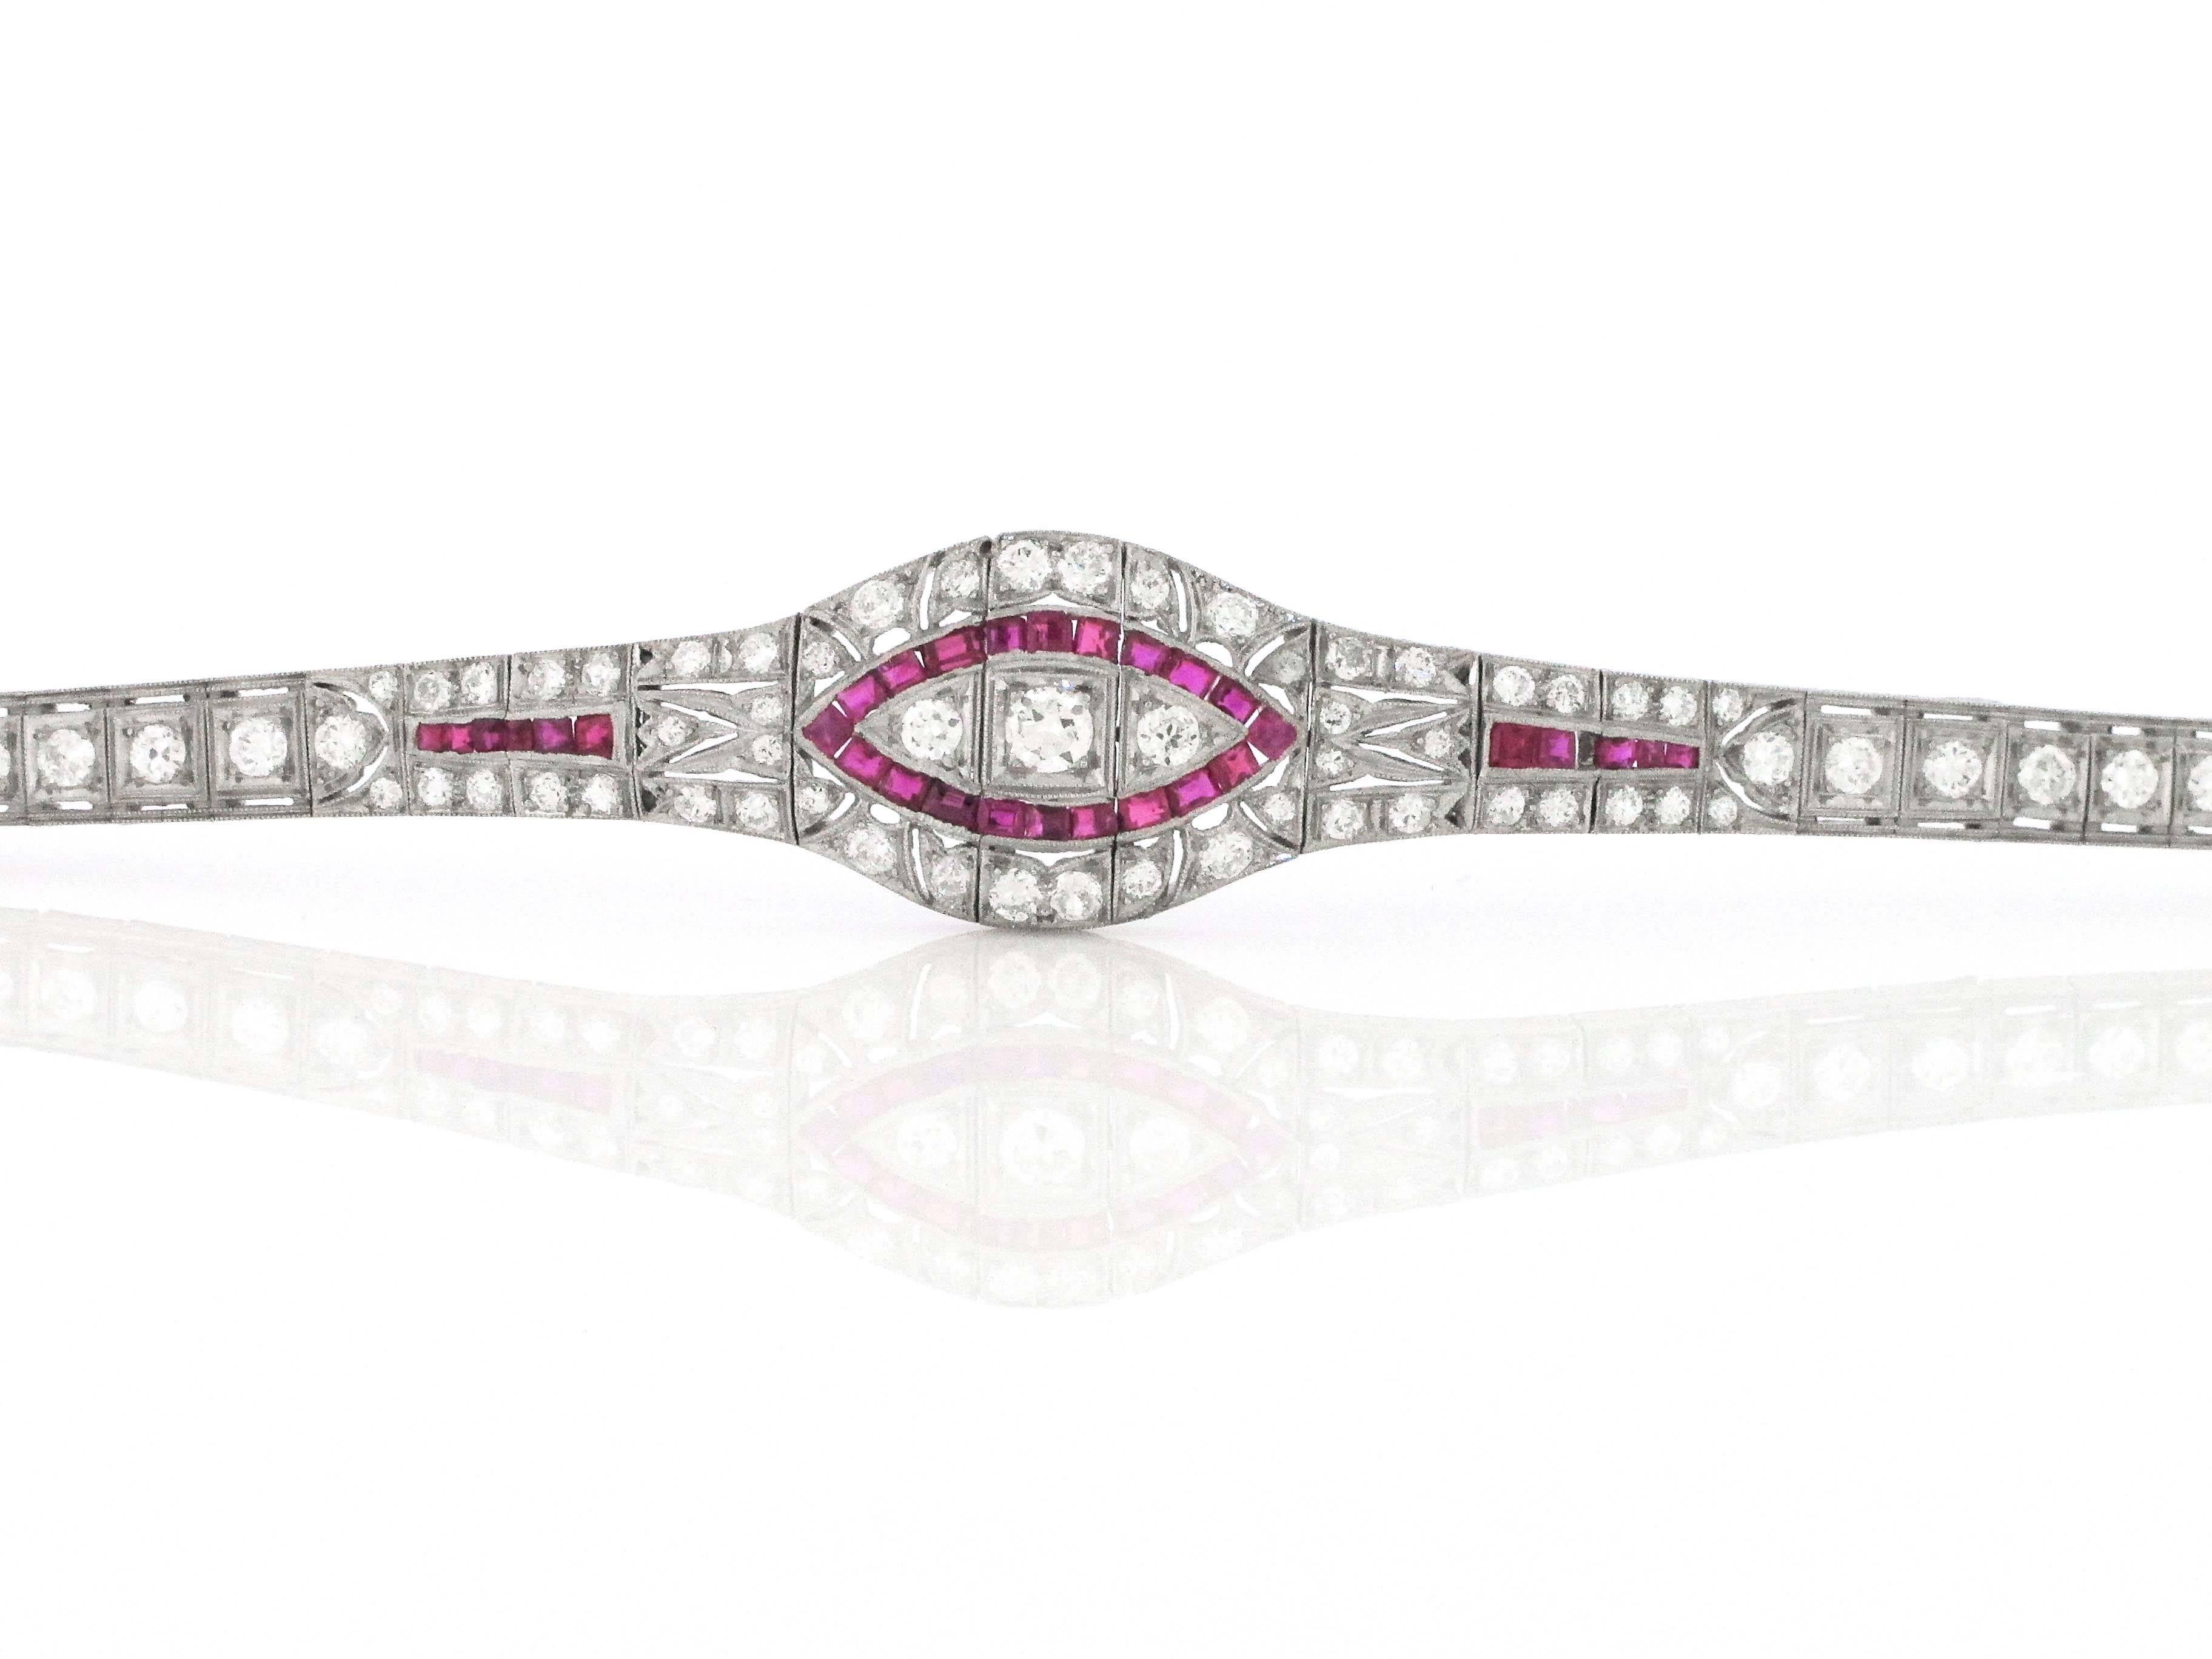 A spectacular representation of authentic 1920's Art Deco jewelry. This Ruby and Diamond bracelet looks like it came straight from the Gatsby collection. It is super elegant and in superb condition. The bracelet fits nicely on the wrist and the